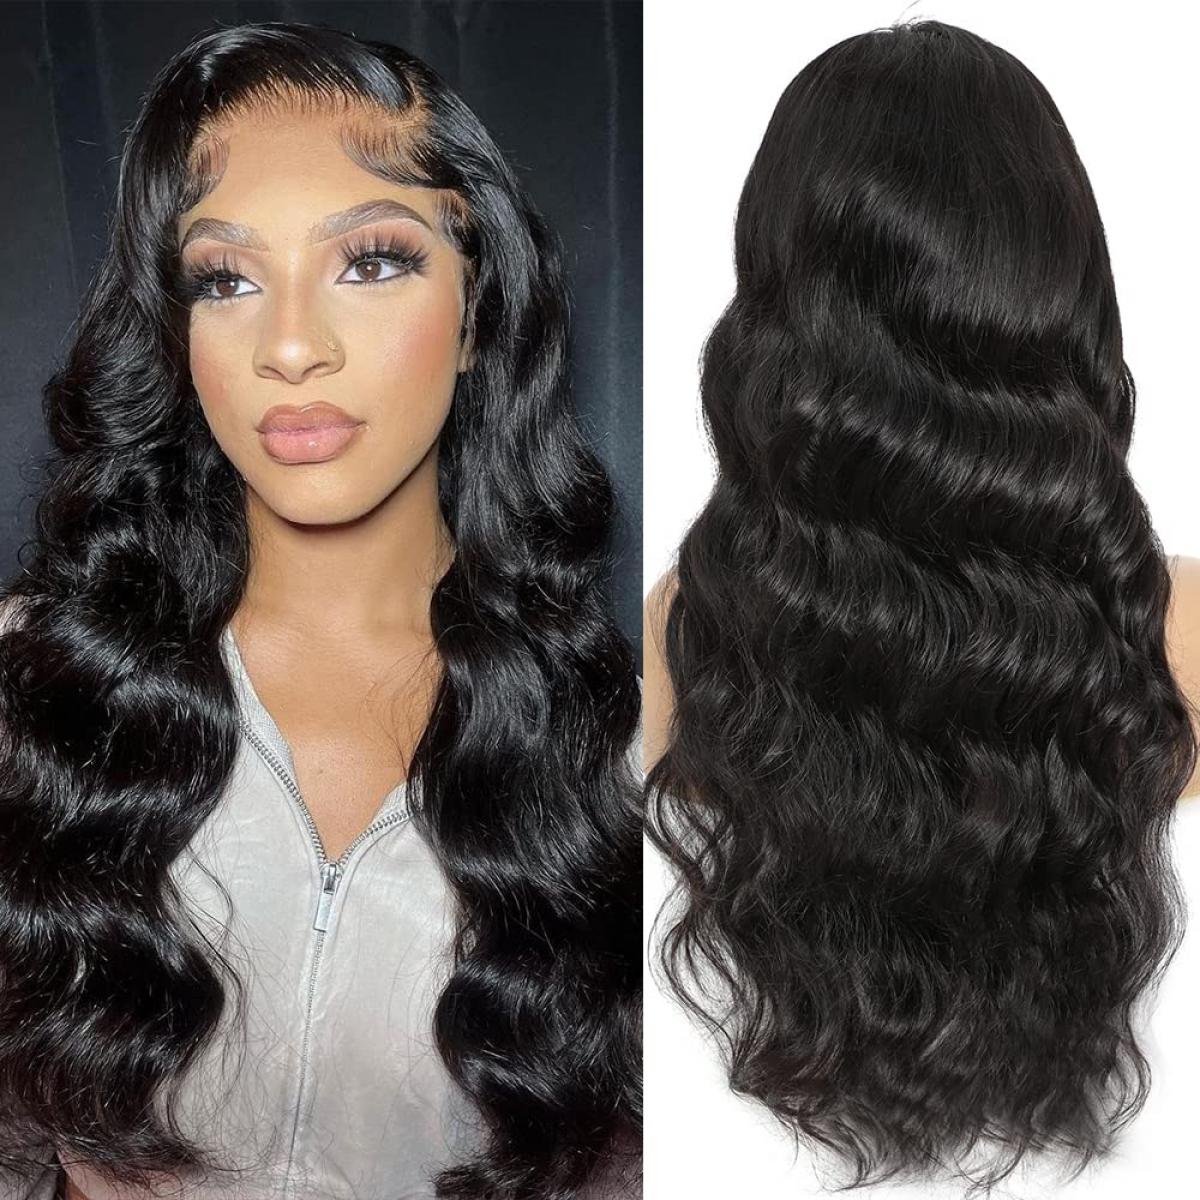 FREYARA 5x5 Lace Front Wigs Human Natural Hair, Body Wave, 150% Density,  Pre Plucked Hairline, 26inch/65cm